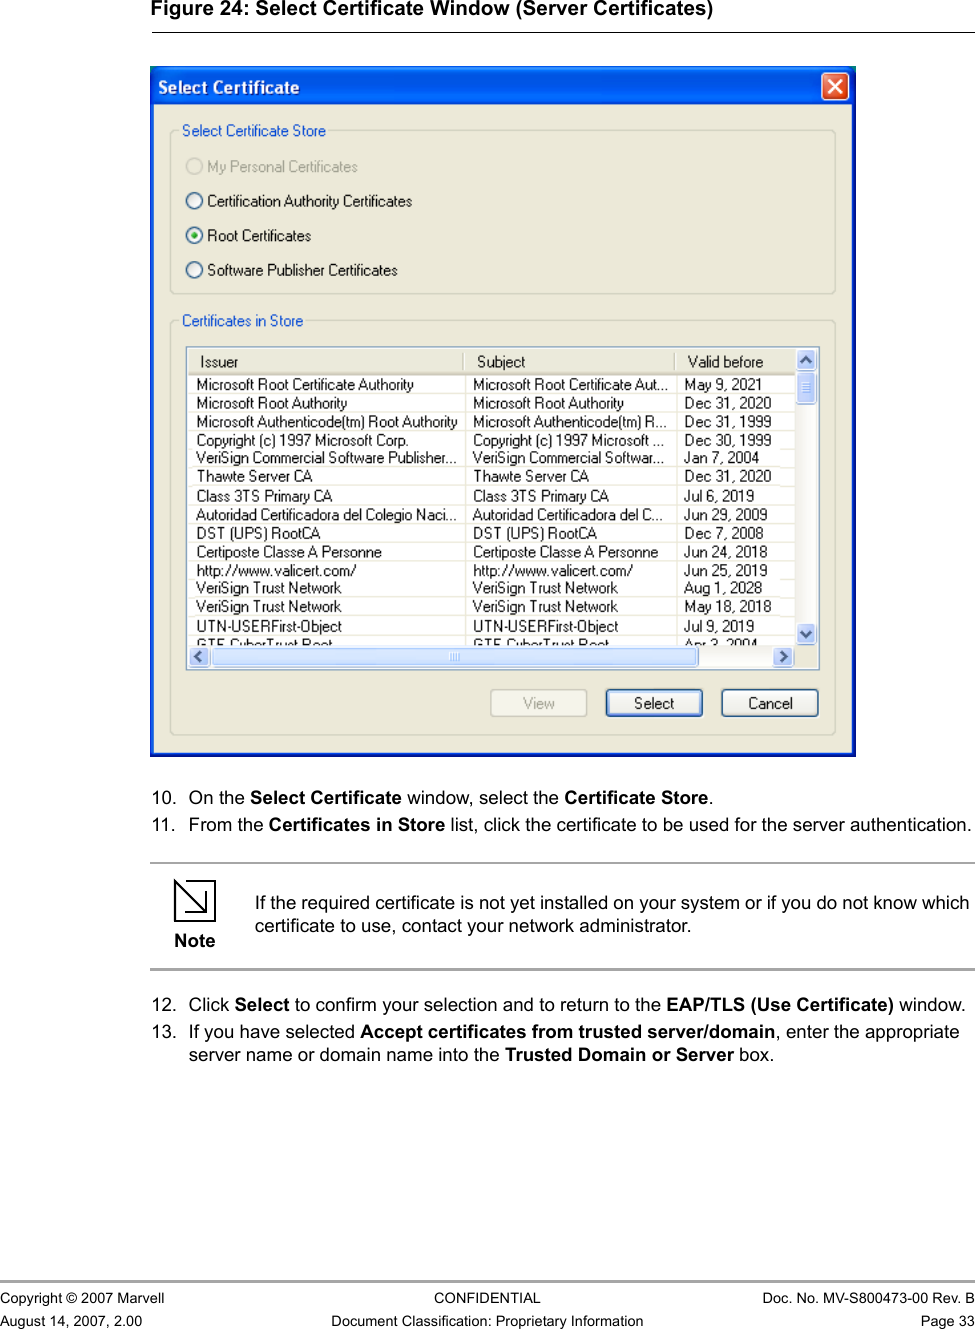 Marvell Wireless Configuration Utility User InterfaceProfile Manager Tab                         Copyright © 2007 Marvell CONFIDENTIAL Doc. No. MV-S800473-00 Rev. BAugust 14, 2007, 2.00 Document Classification: Proprietary Information Page 33                          10. On the Select Certificate window, select the Certificate Store.11. From the Certificates in Store list, click the certificate to be used for the server authentication.12. Click Select to confirm your selection and to return to the EAP/TLS (Use Certificate) window.13. If you have selected Accept certificates from trusted server/domain, enter the appropriate server name or domain name into the Trusted Domain or Server box.Figure 24: Select Certificate Window (Server Certificates)                         NoteIf the required certificate is not yet installed on your system or if you do not know which certificate to use, contact your network administrator.